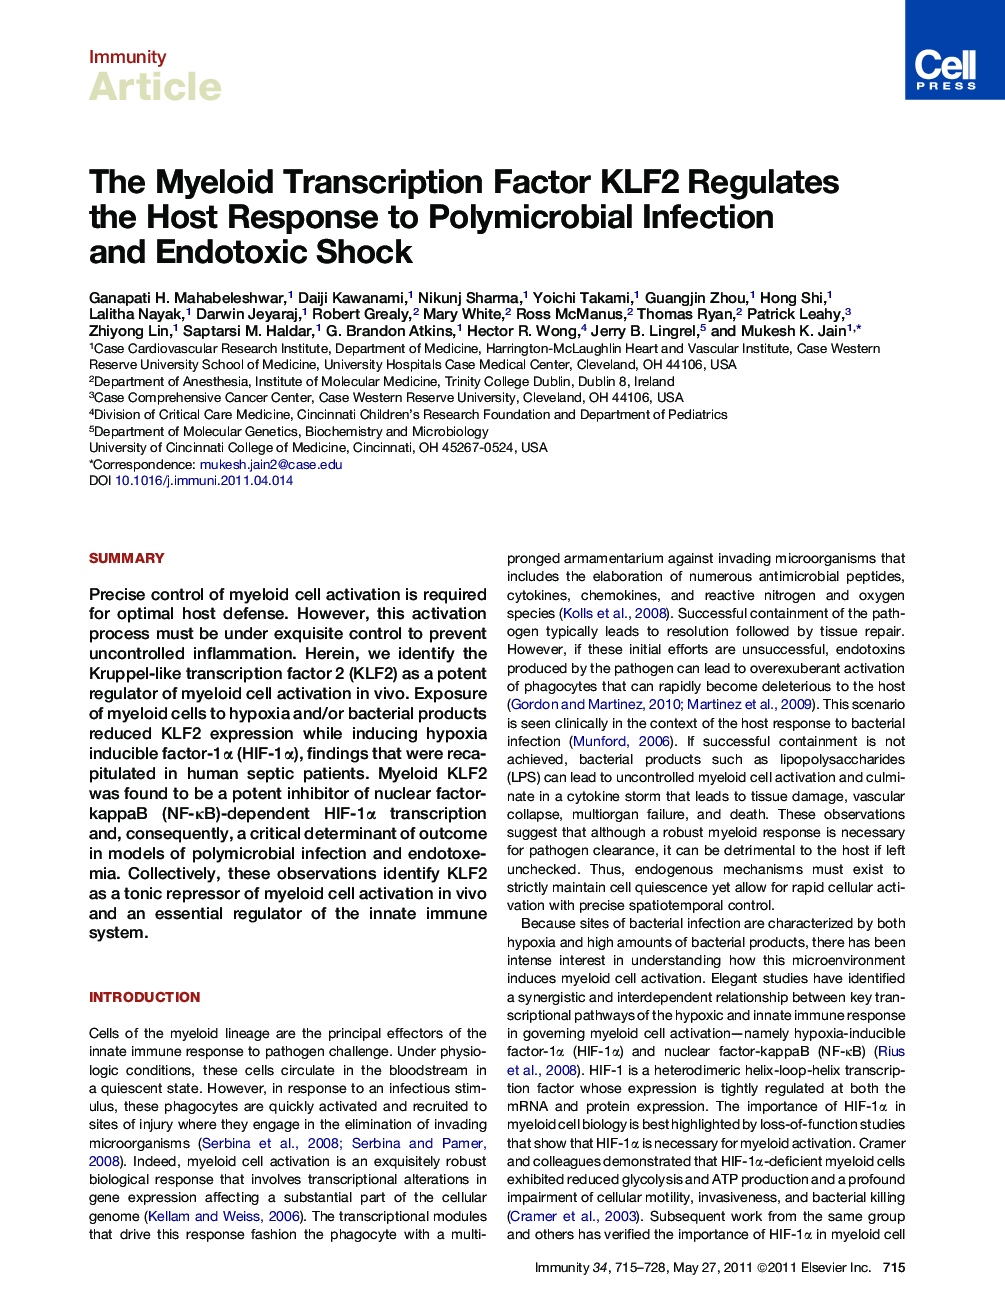 The Myeloid Transcription Factor KLF2 Regulates the Host Response to Polymicrobial Infection and Endotoxic Shock